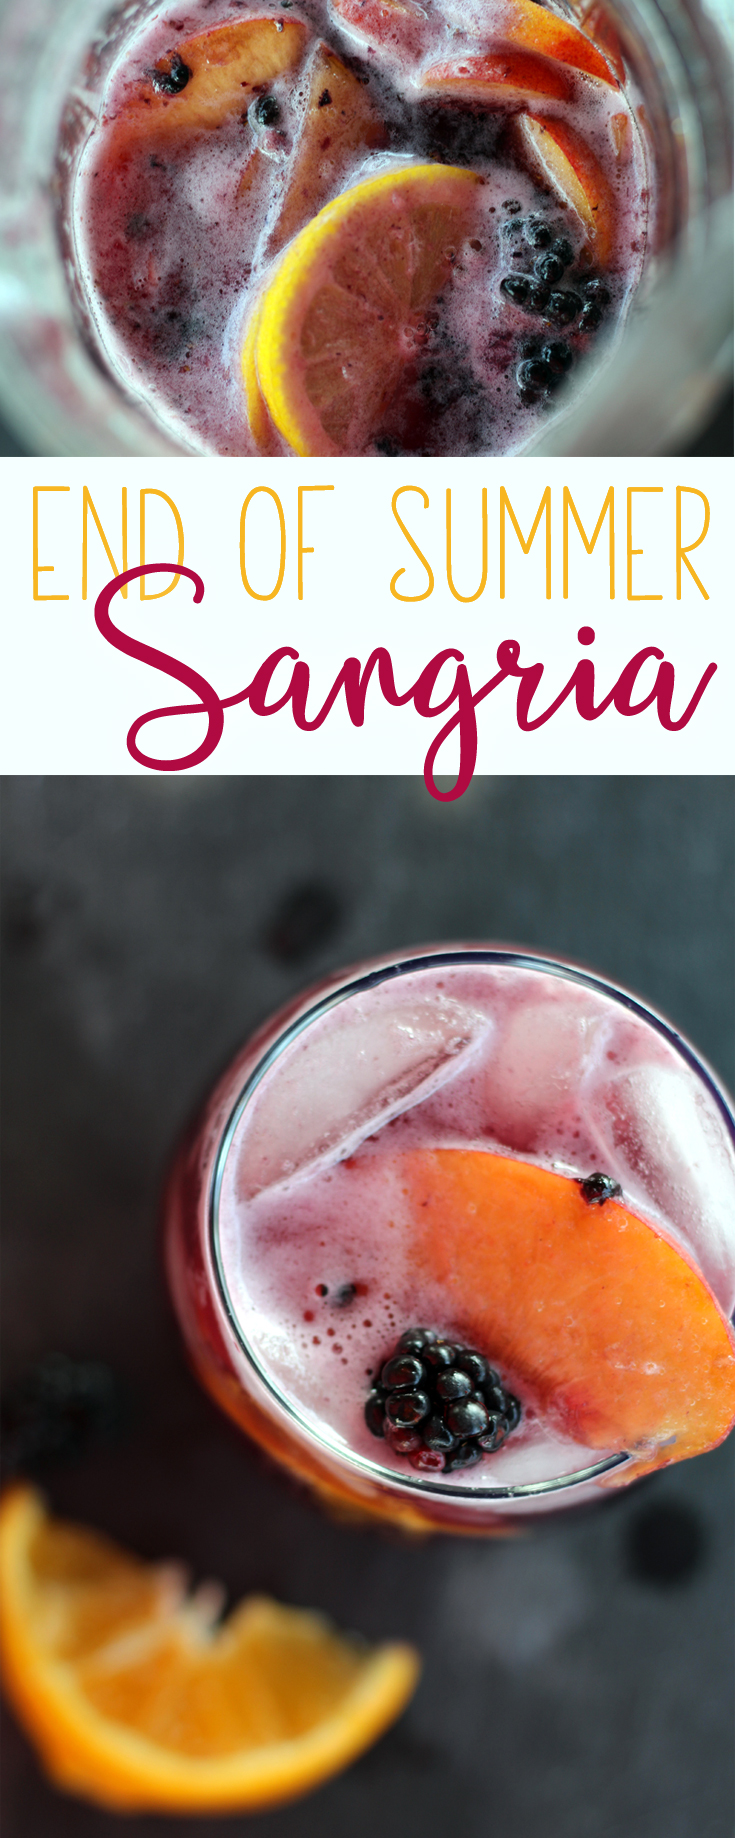 Enjoy the last seasonal flavors of summer when you whip up this Summer's End Sangria recipe. Perfect for any celebration, this easy sparkling wine punch is a refreshing crowd pleaser.